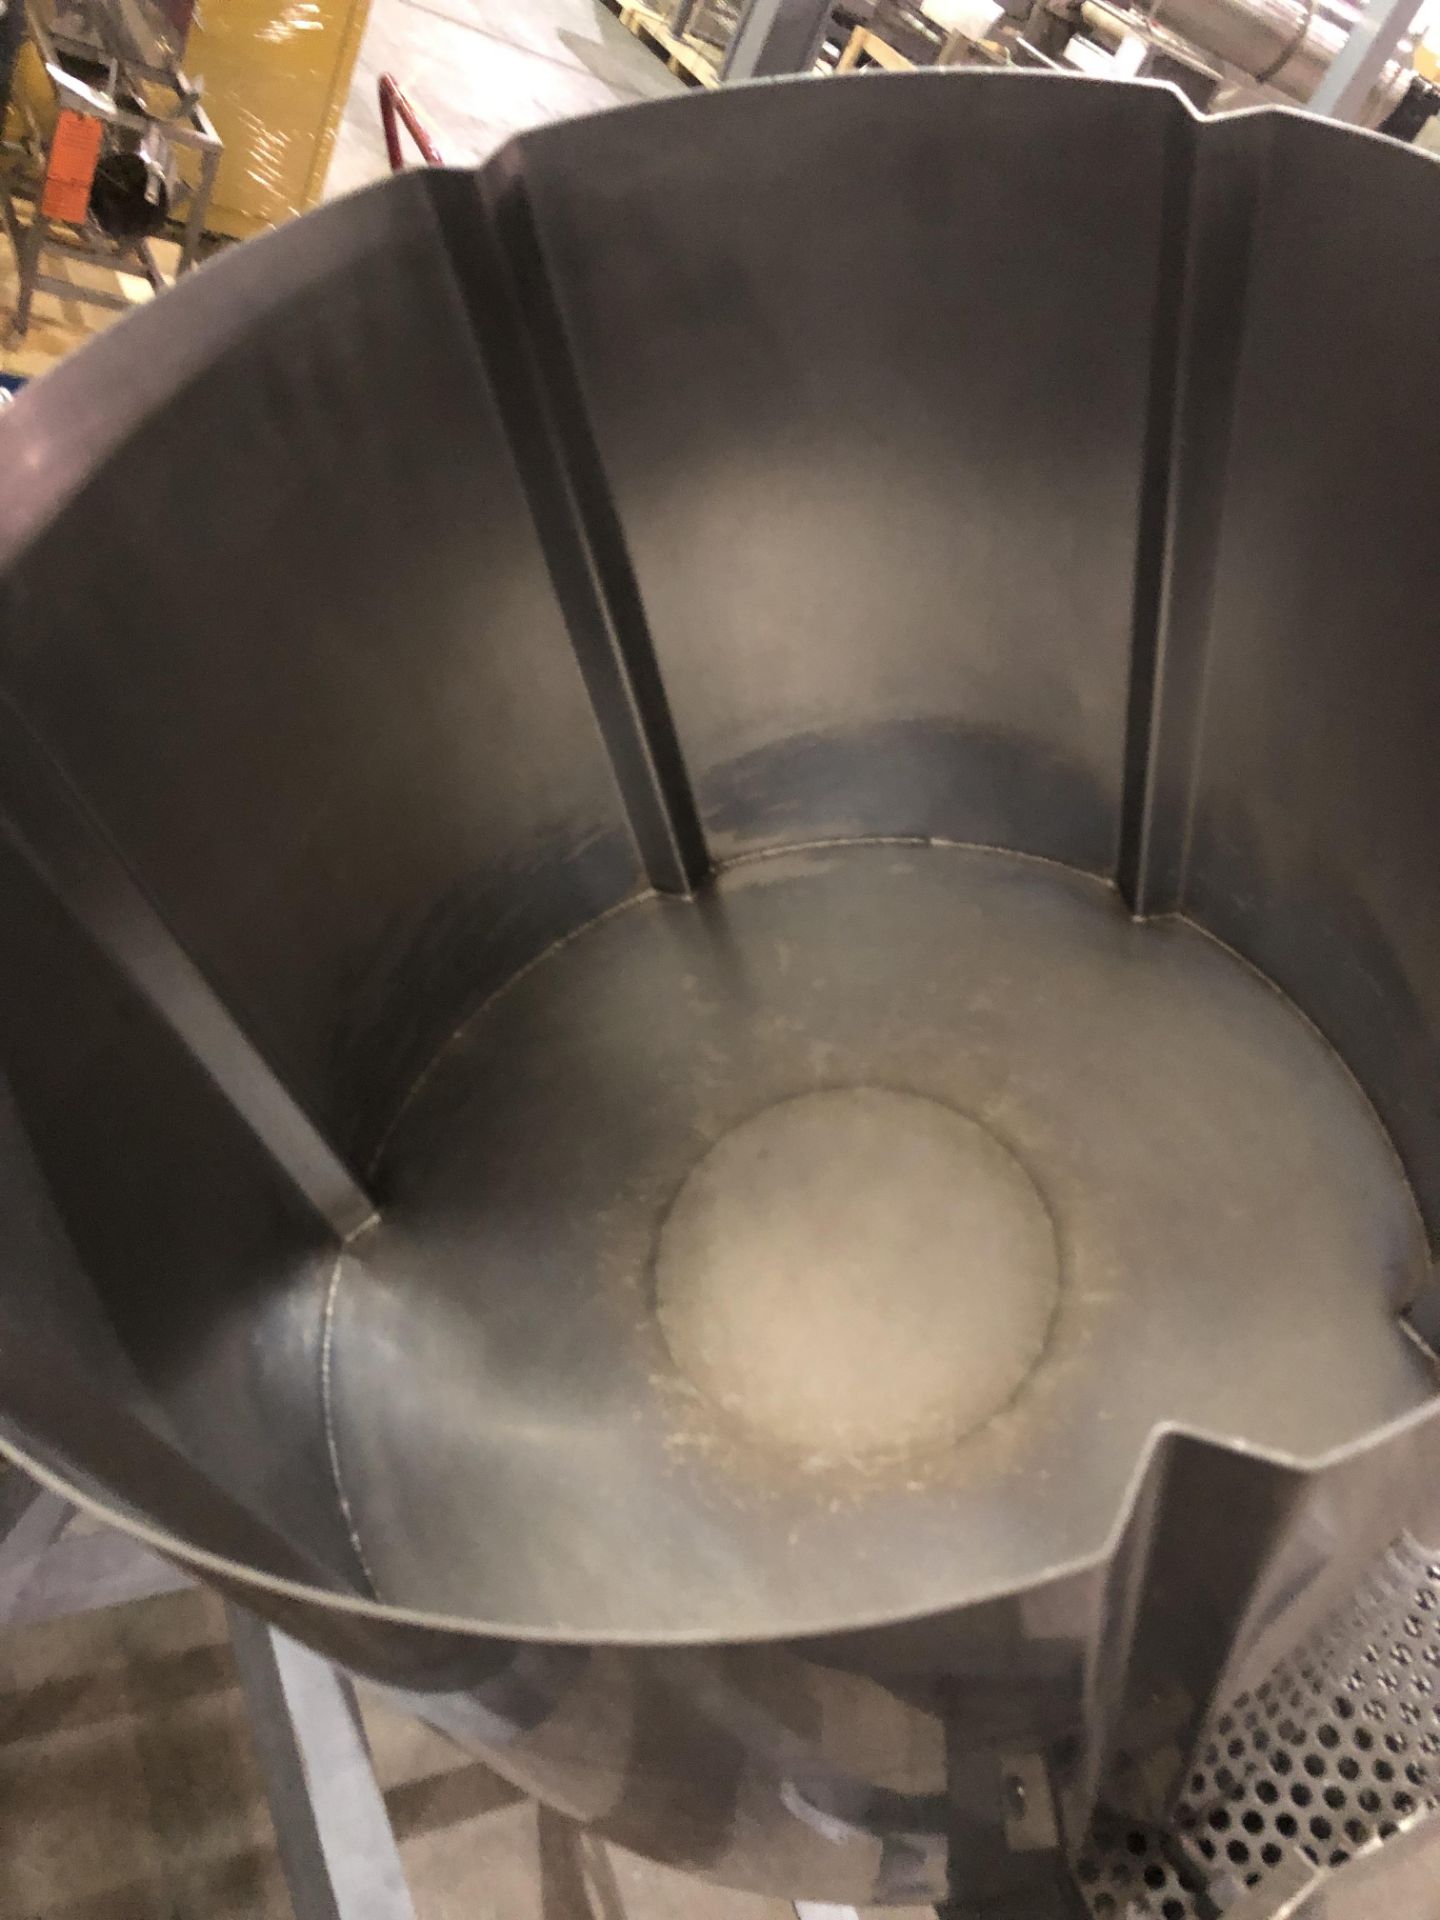 Shop Built Rotary Coating Drum, RIGGING FEE $50 - Image 3 of 4